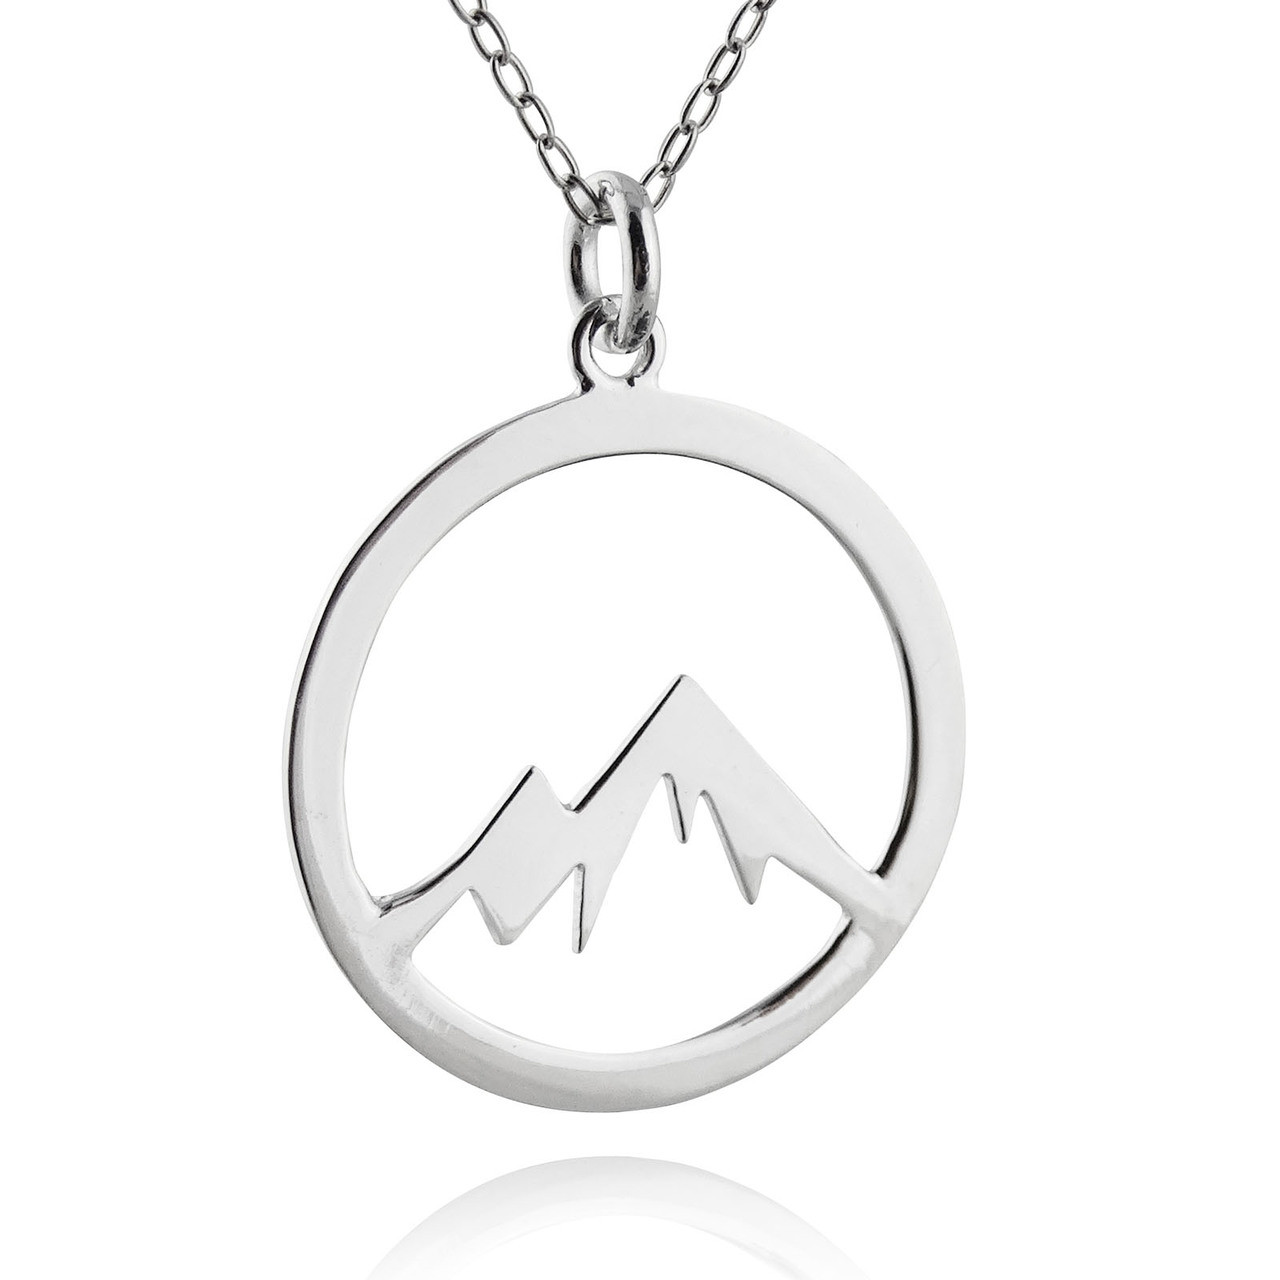 Round Mountain Peaks Cutout Necklace - 925 Sterling Silver ...